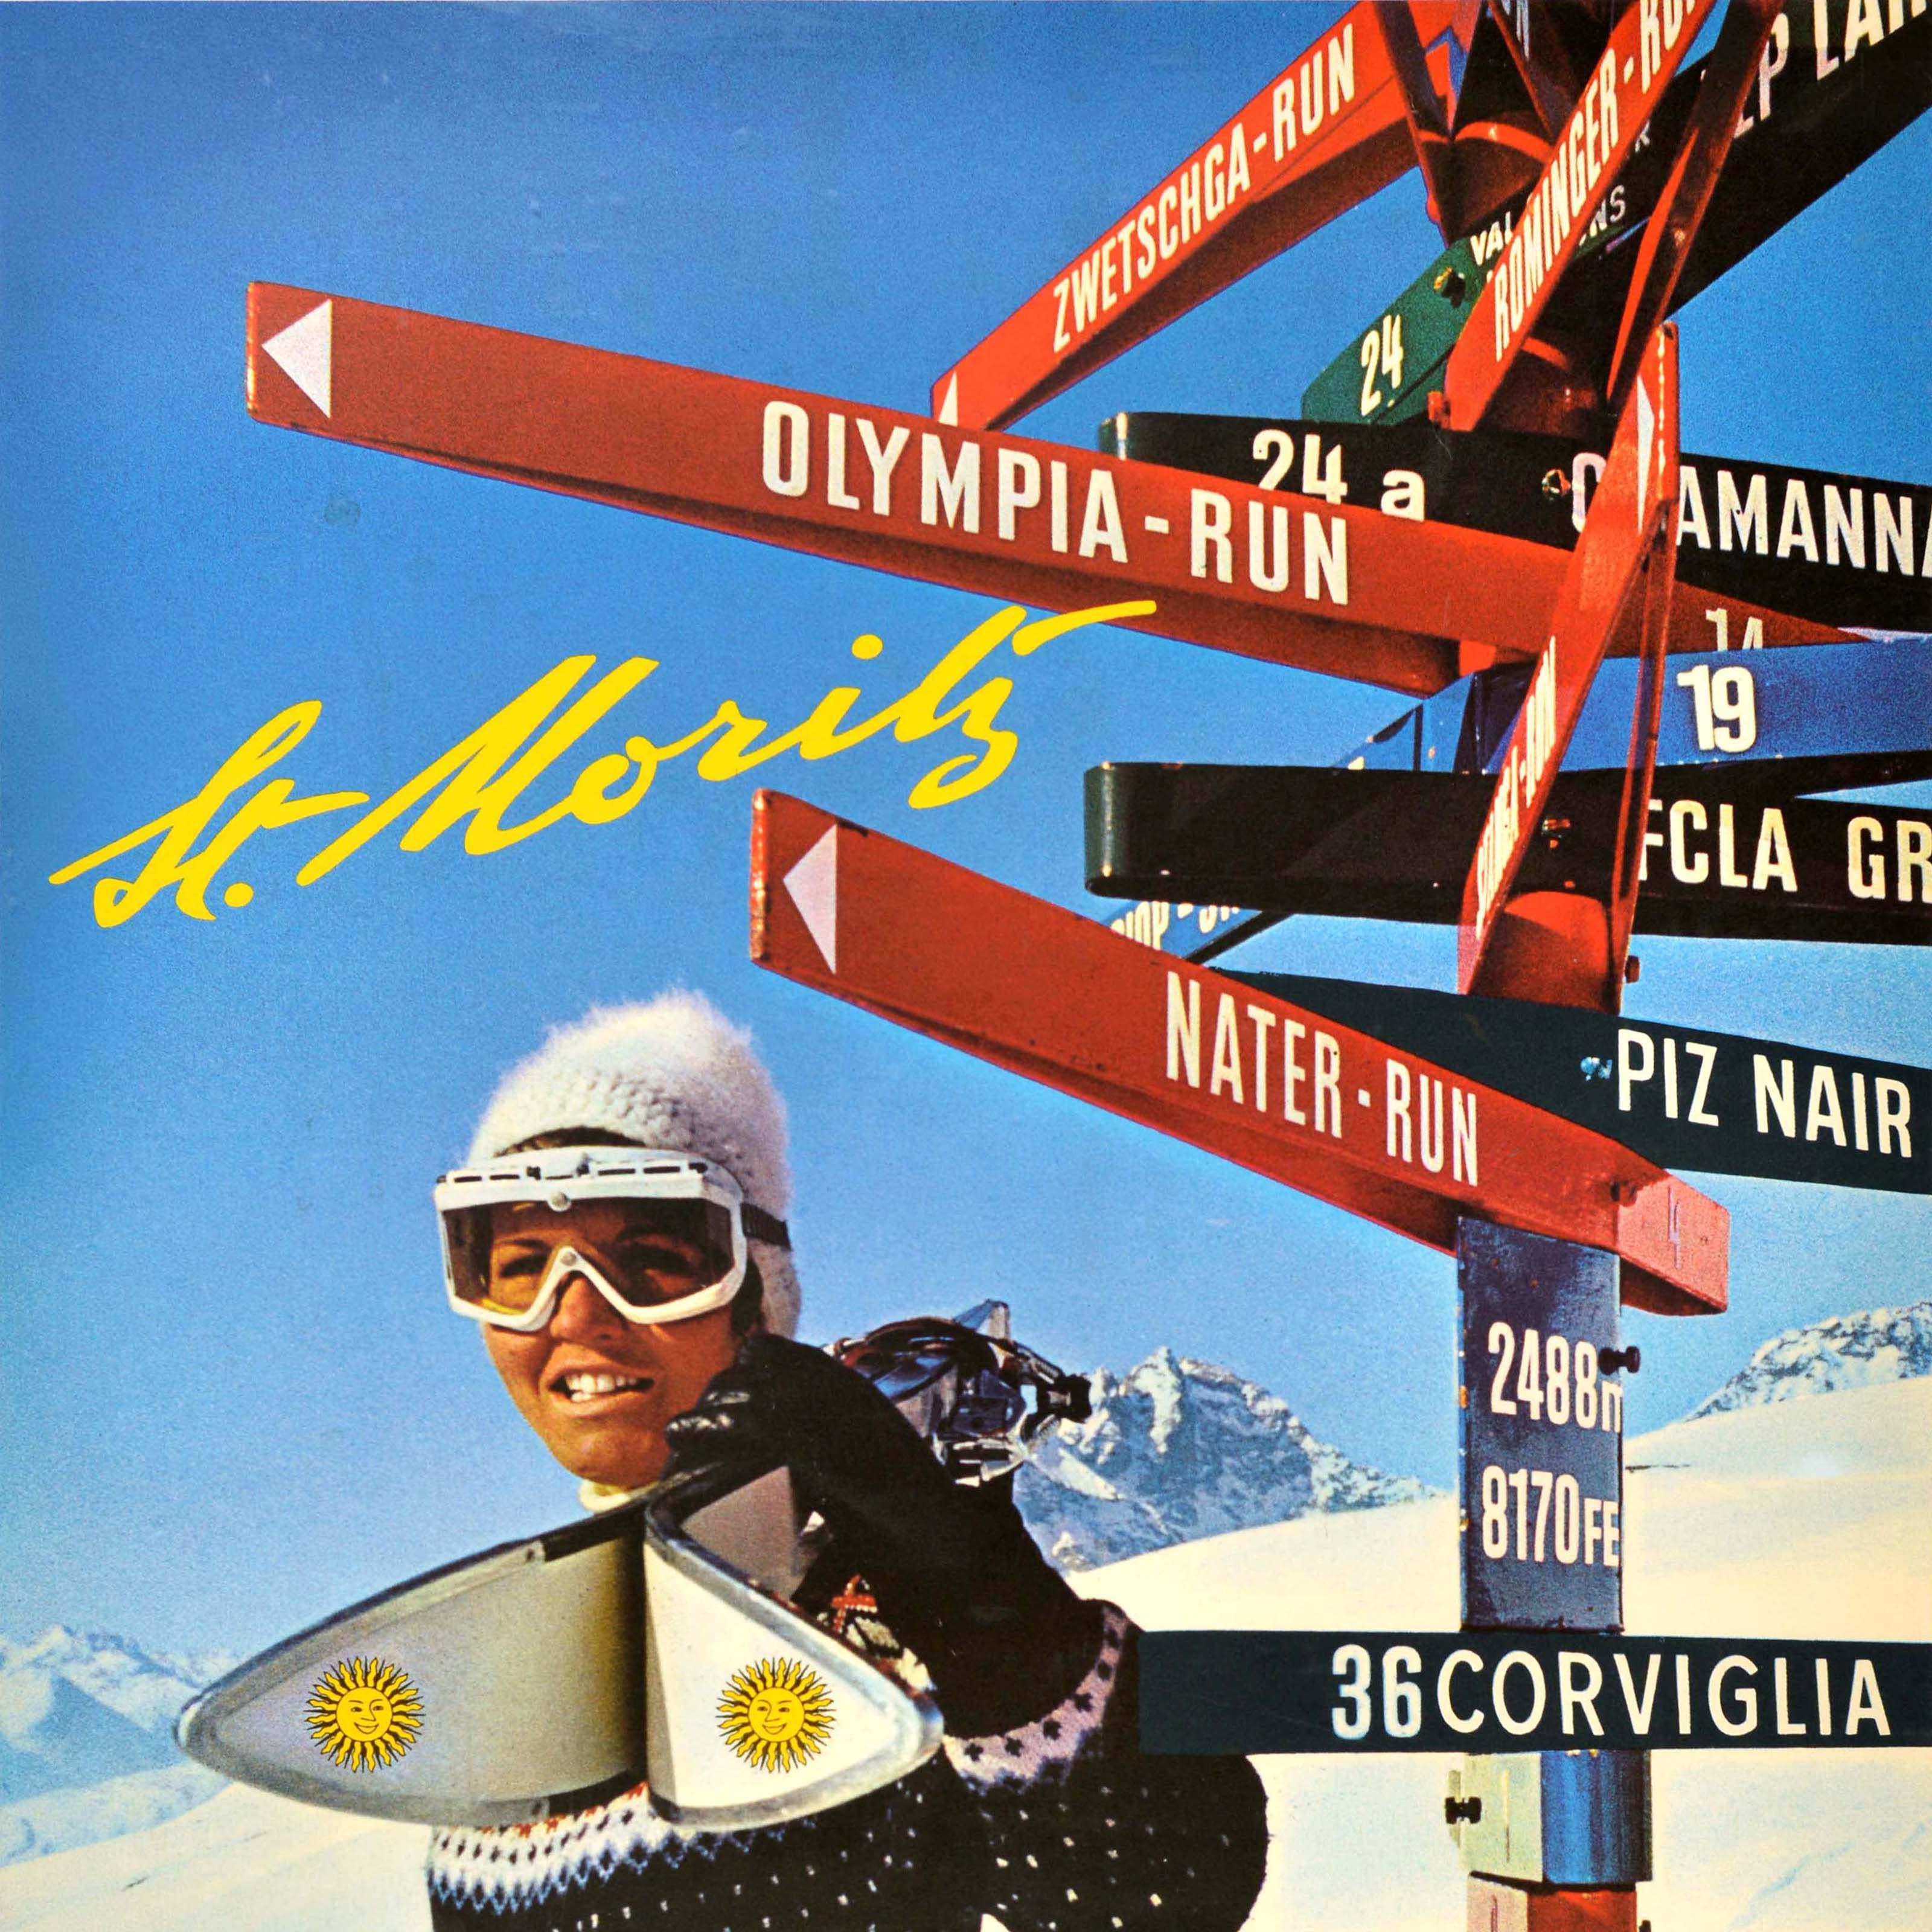 Original vintage skiing poster for the alpine resort of St Moritz in Switzerland featuring a skier wearing ski goggles, a bobble hat and knitted jumper, and holding poles and a pair of skis with the St Moritz sun logo on them, standing in front of a